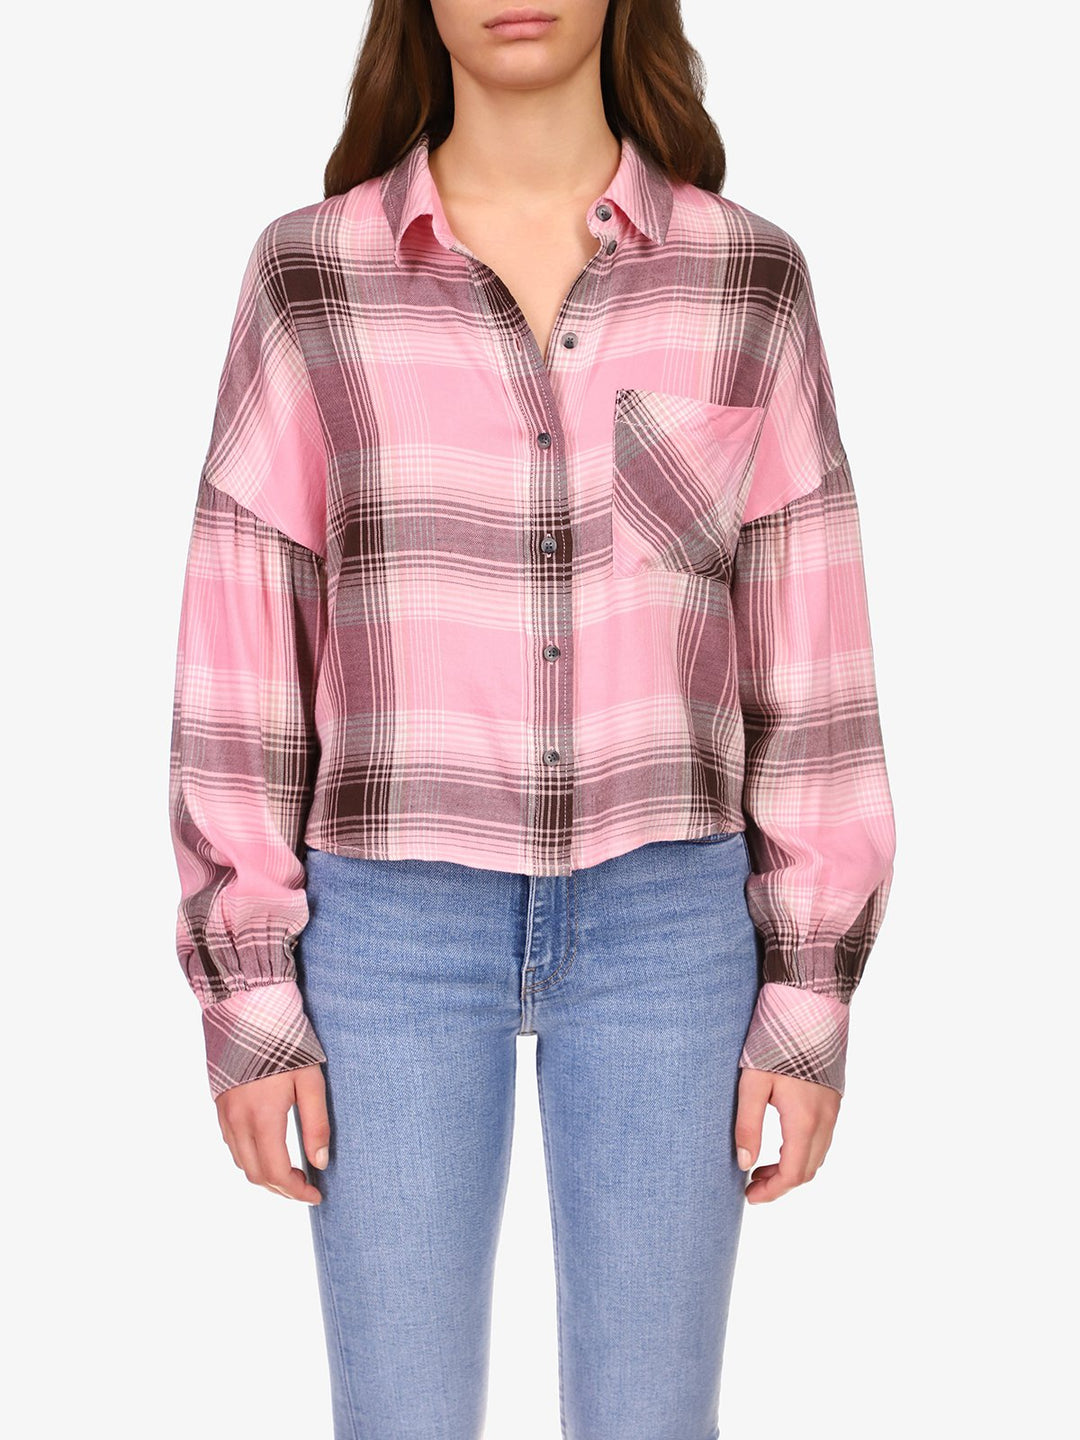 THE CABIN SHIRT - Kingfisher Road - Online Boutique